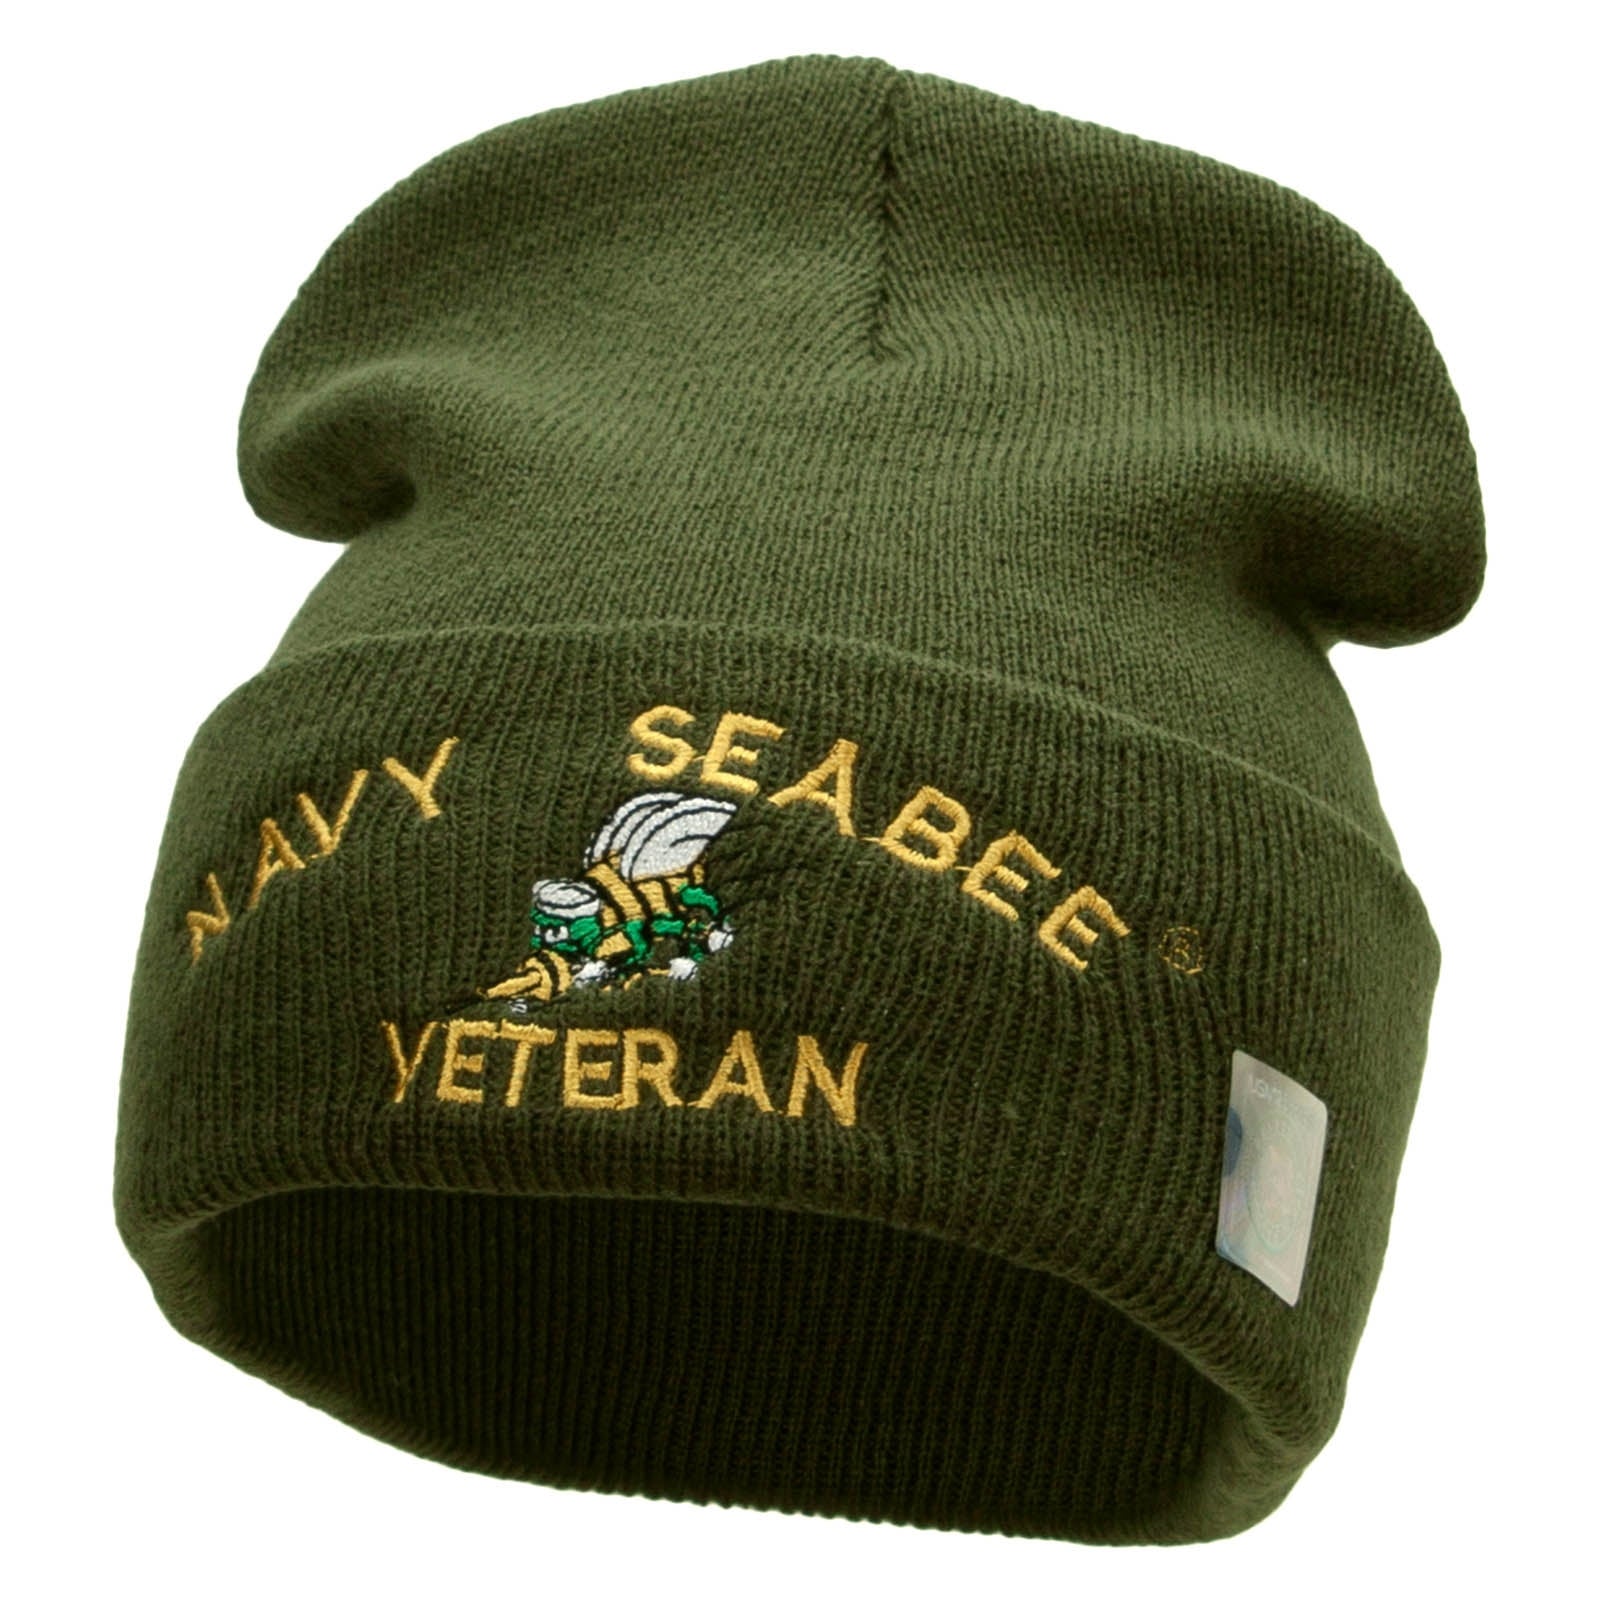 Licensed Navy Seabee Veteran Logo Embroidered Long Beanie Made in USA - Olive OSFM